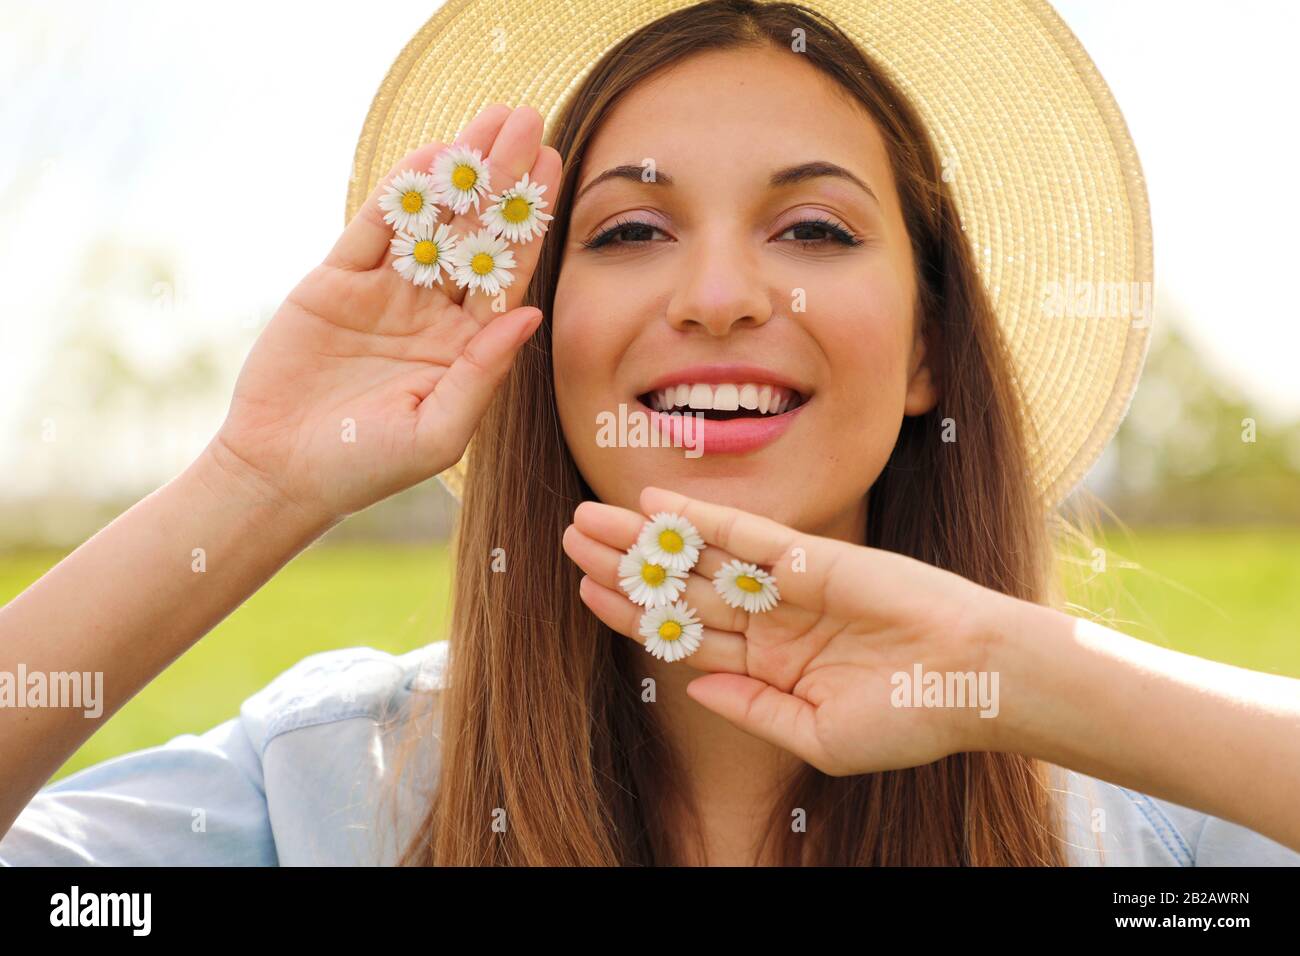 Close up portrait of a beautiful smiling girl with brown hair wearing hat and holds daisies between fingers looking at camera outdoors Stock Photo